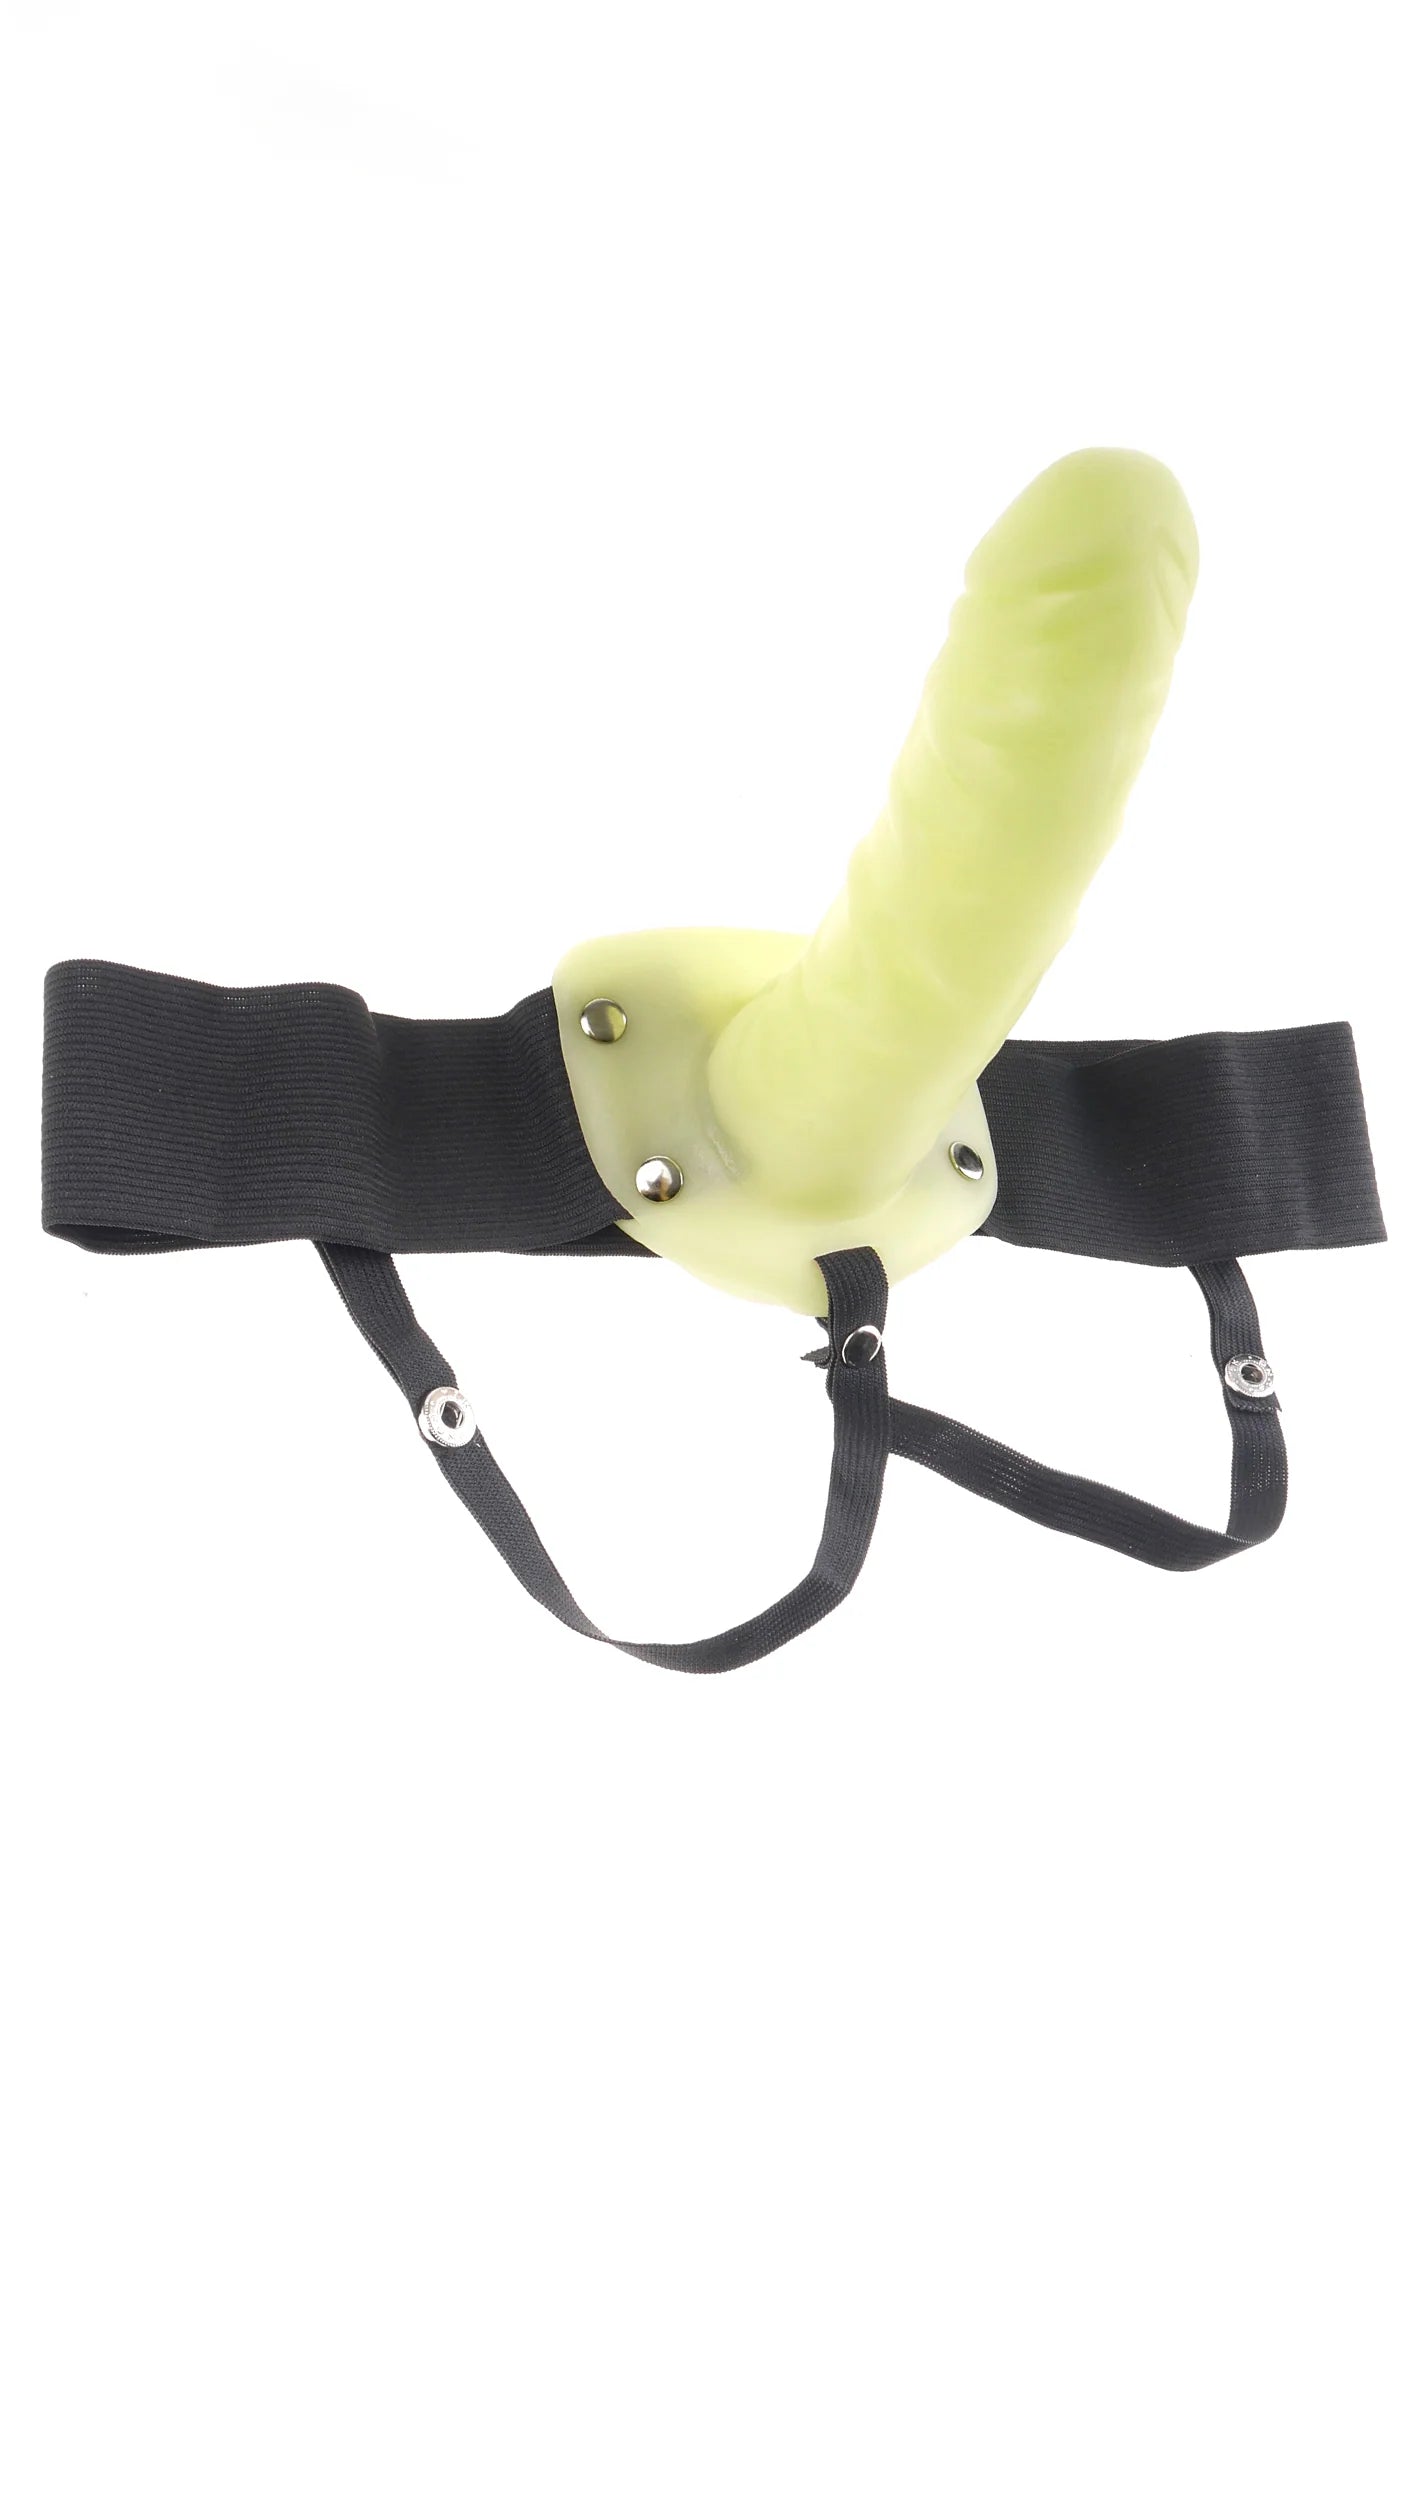 Pipedream Fetish Fantasy Series For Him or Her 6 in. Hollow Strap-On